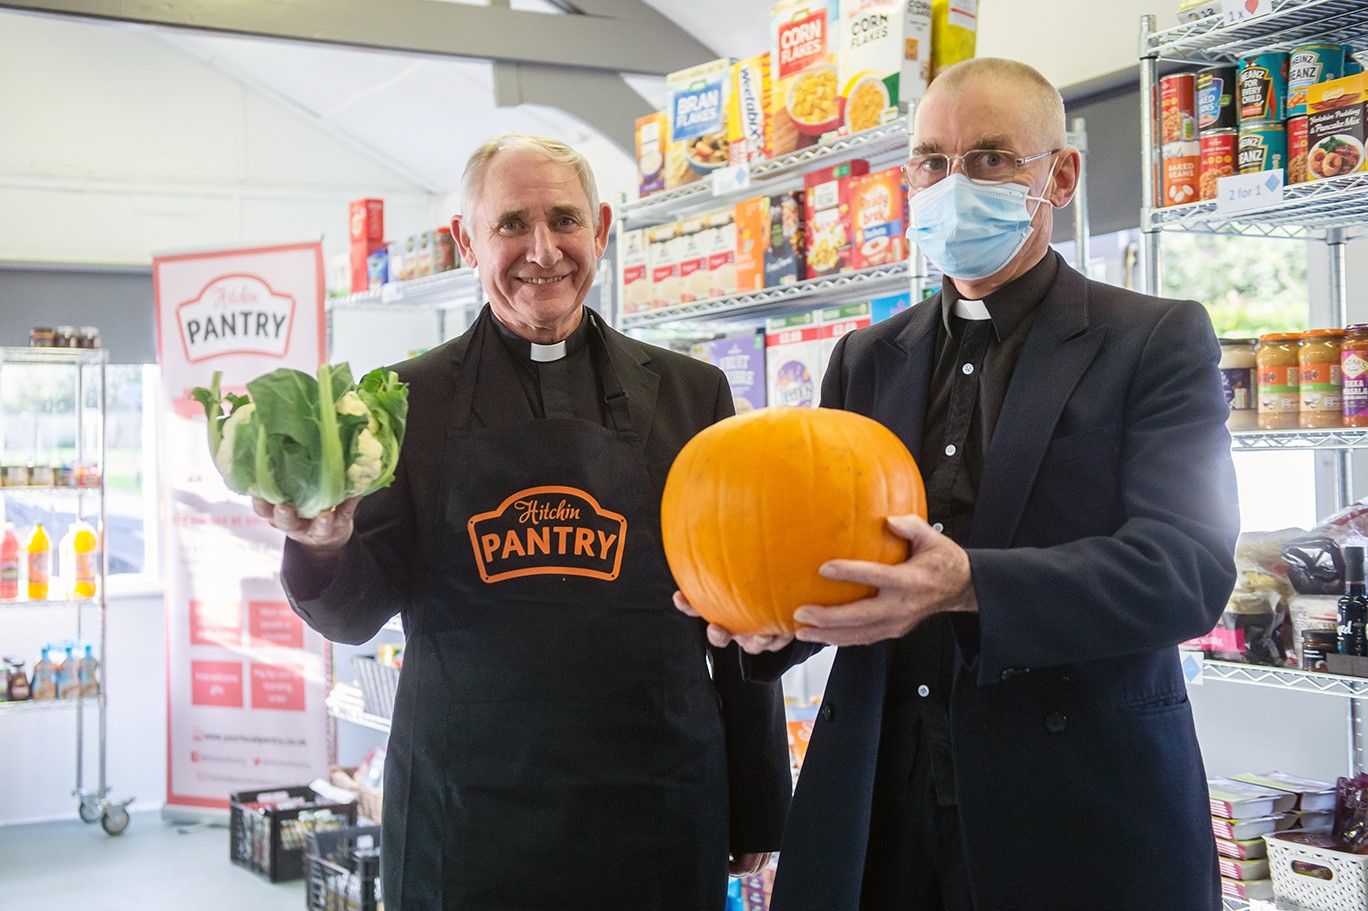 New Community Food Pantry opens in Hitchin - Diocese of Westminster